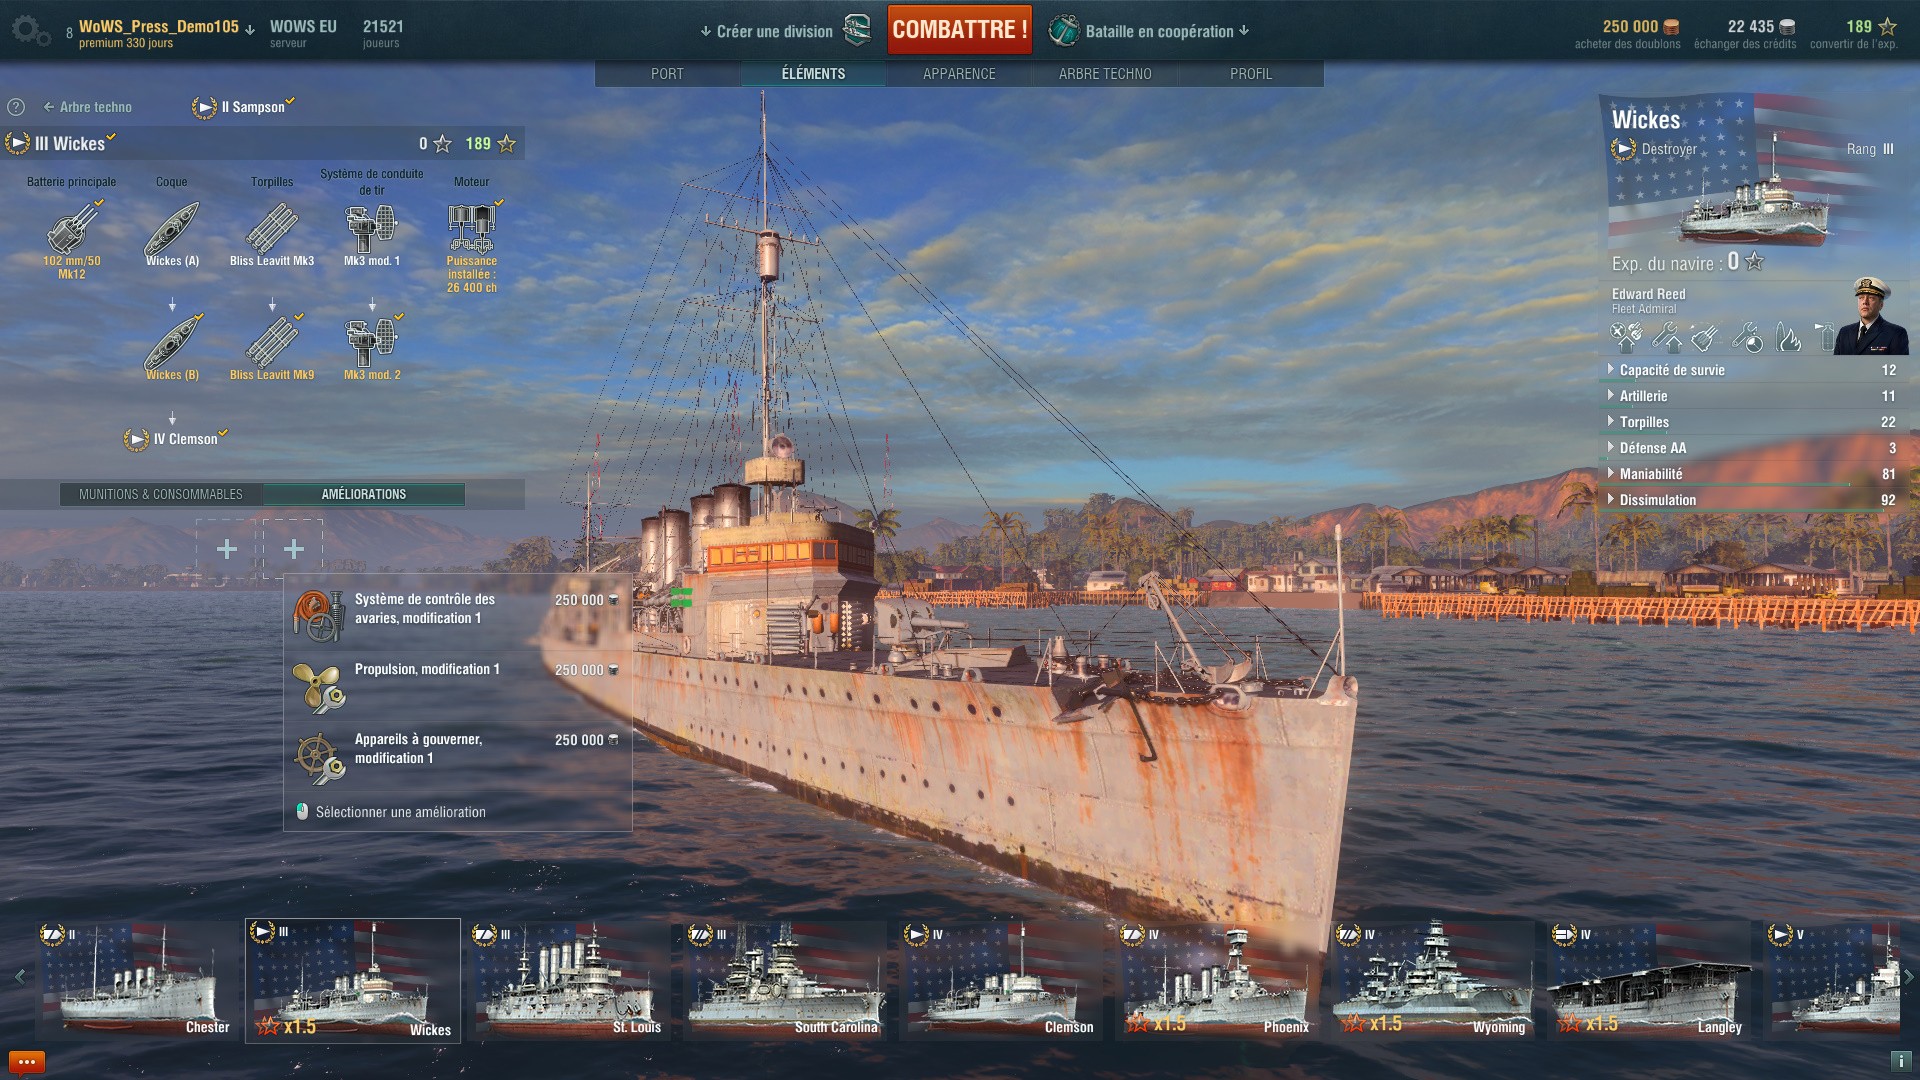 official world of warships modpack